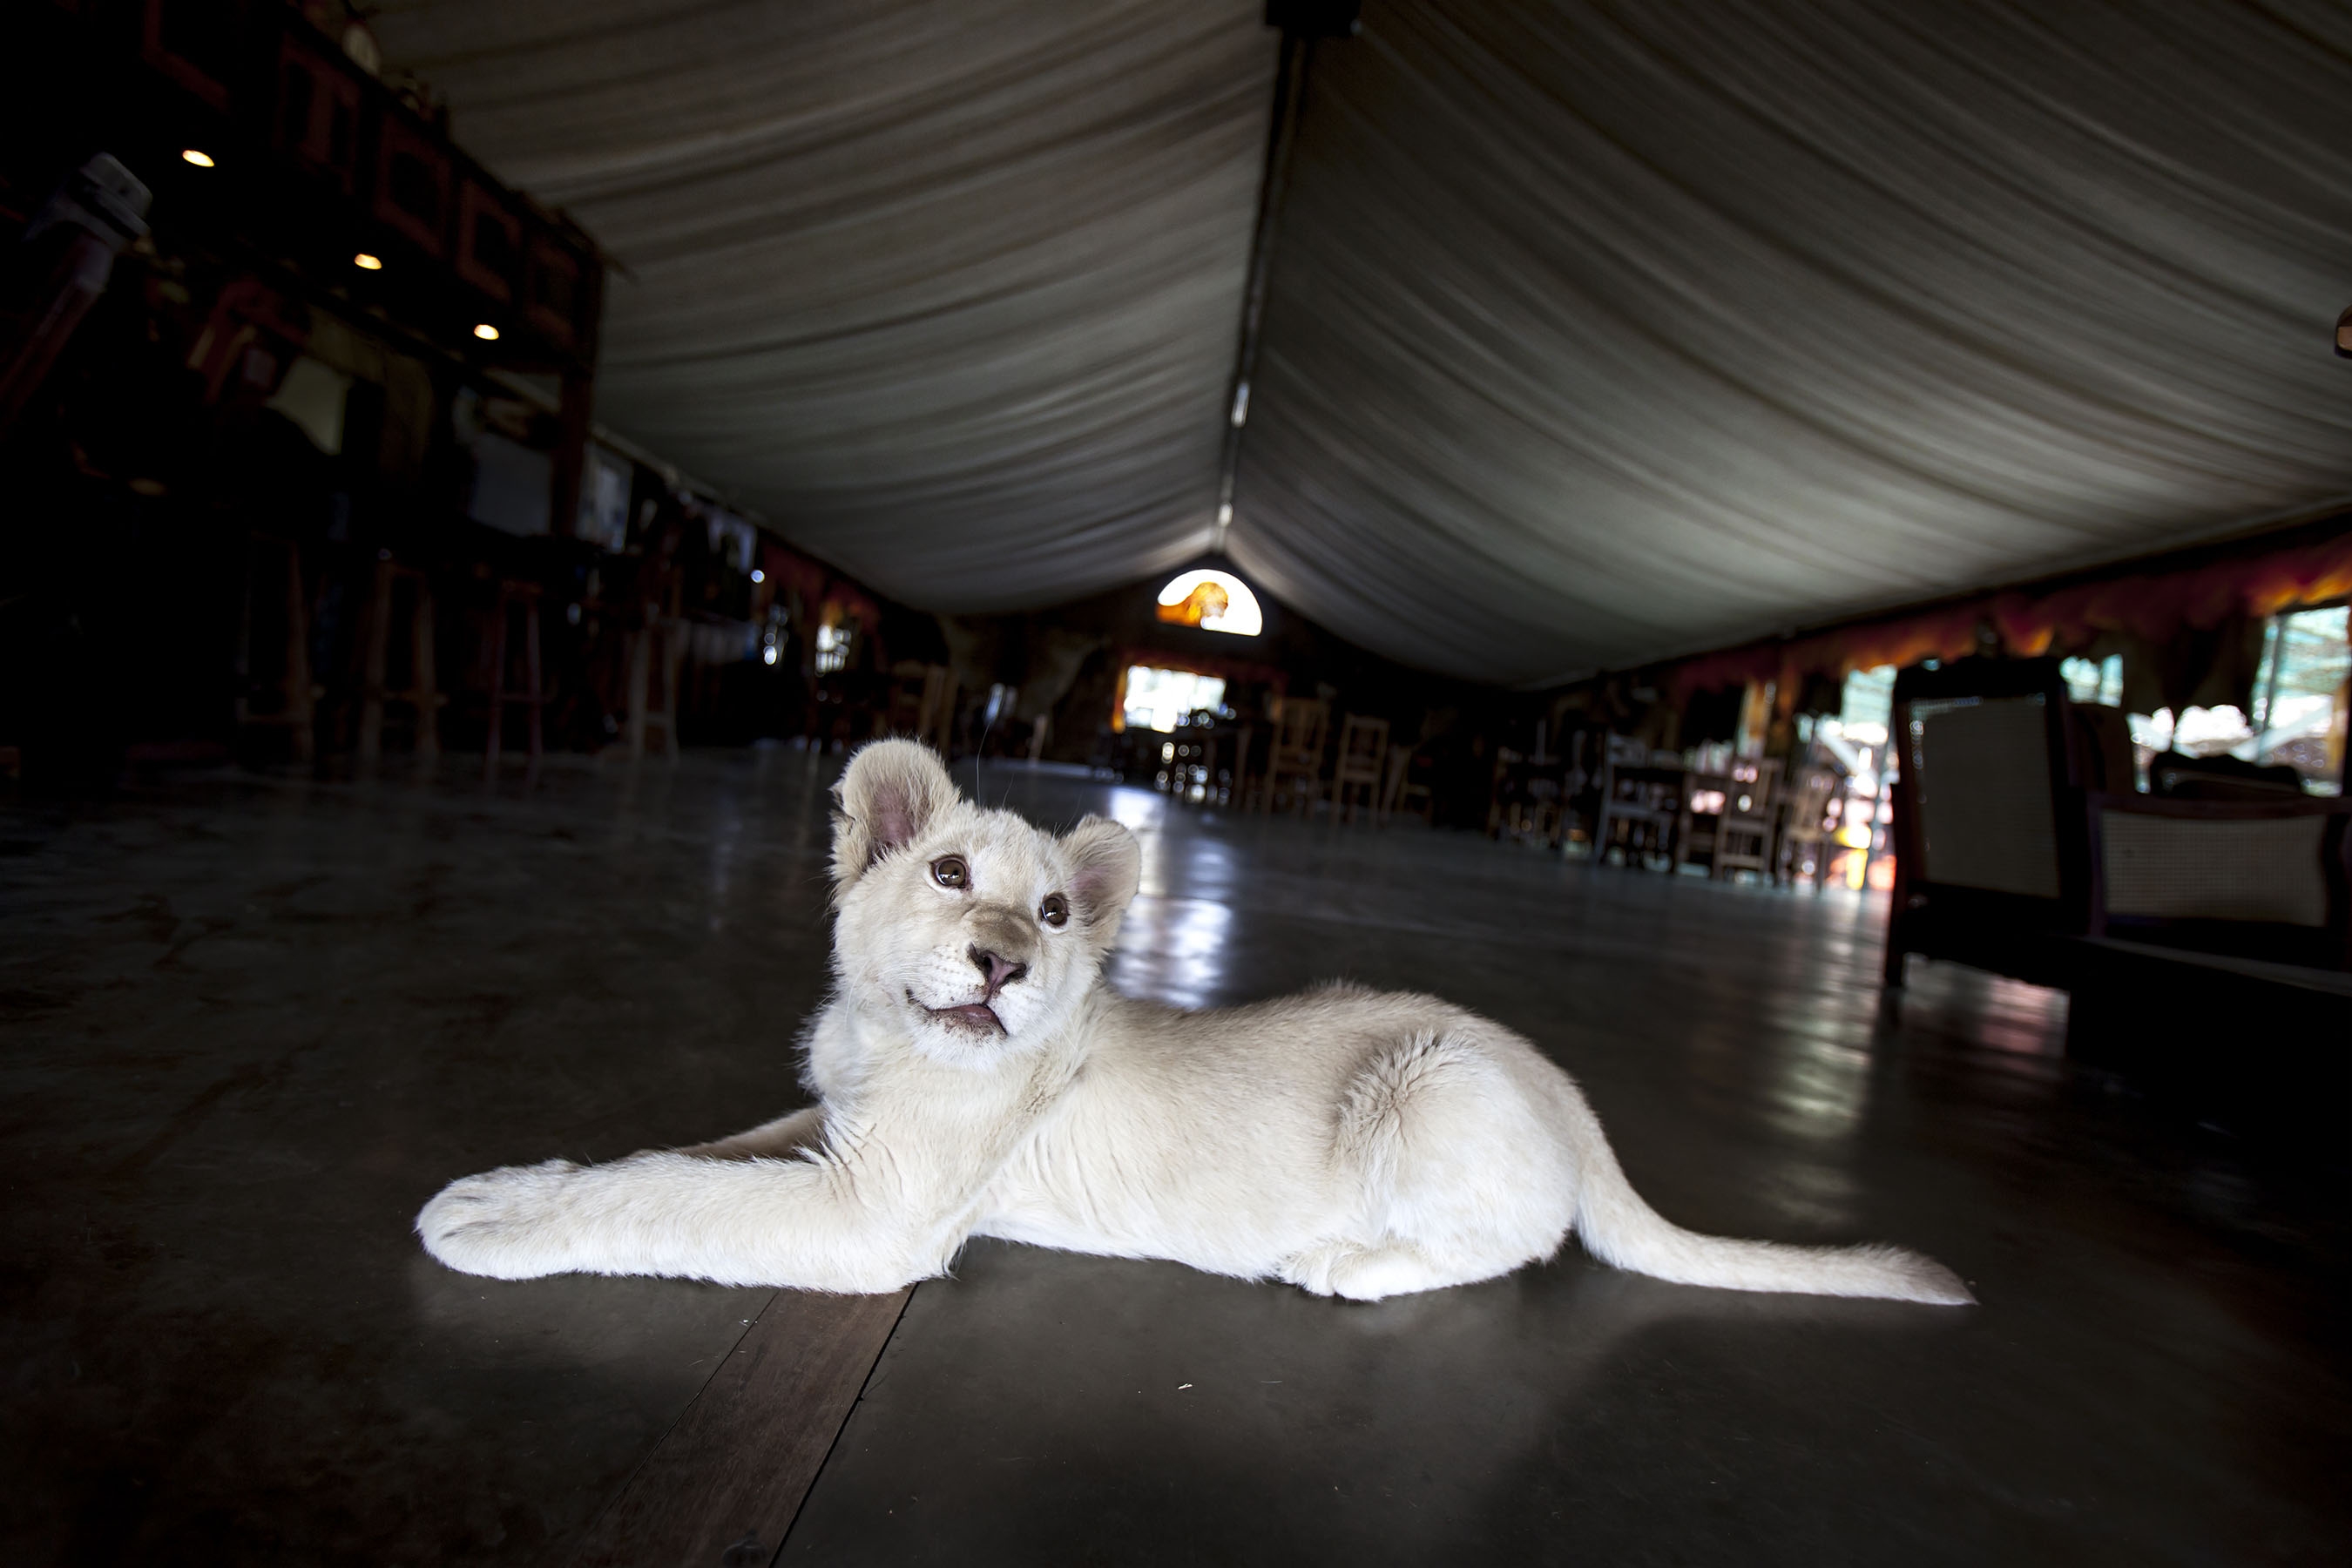 A lion cub lies on the floor of a bar at the Weltevrede Lion Farm on May 23, 2013 in Heilbron, South Africa. Image: Gallo Images / The Times / Daniel Born)